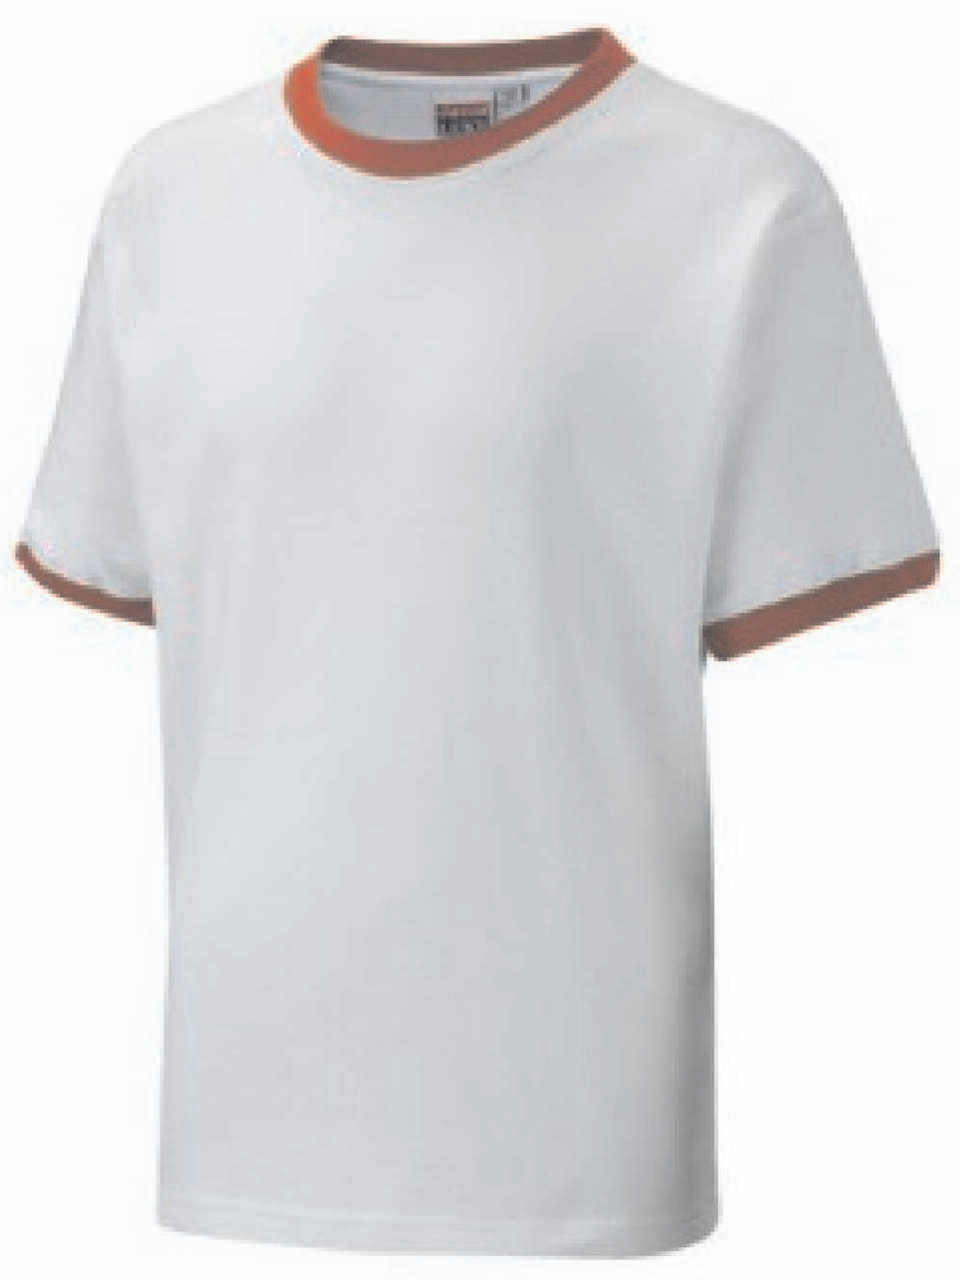 The White T-Shirt With Red